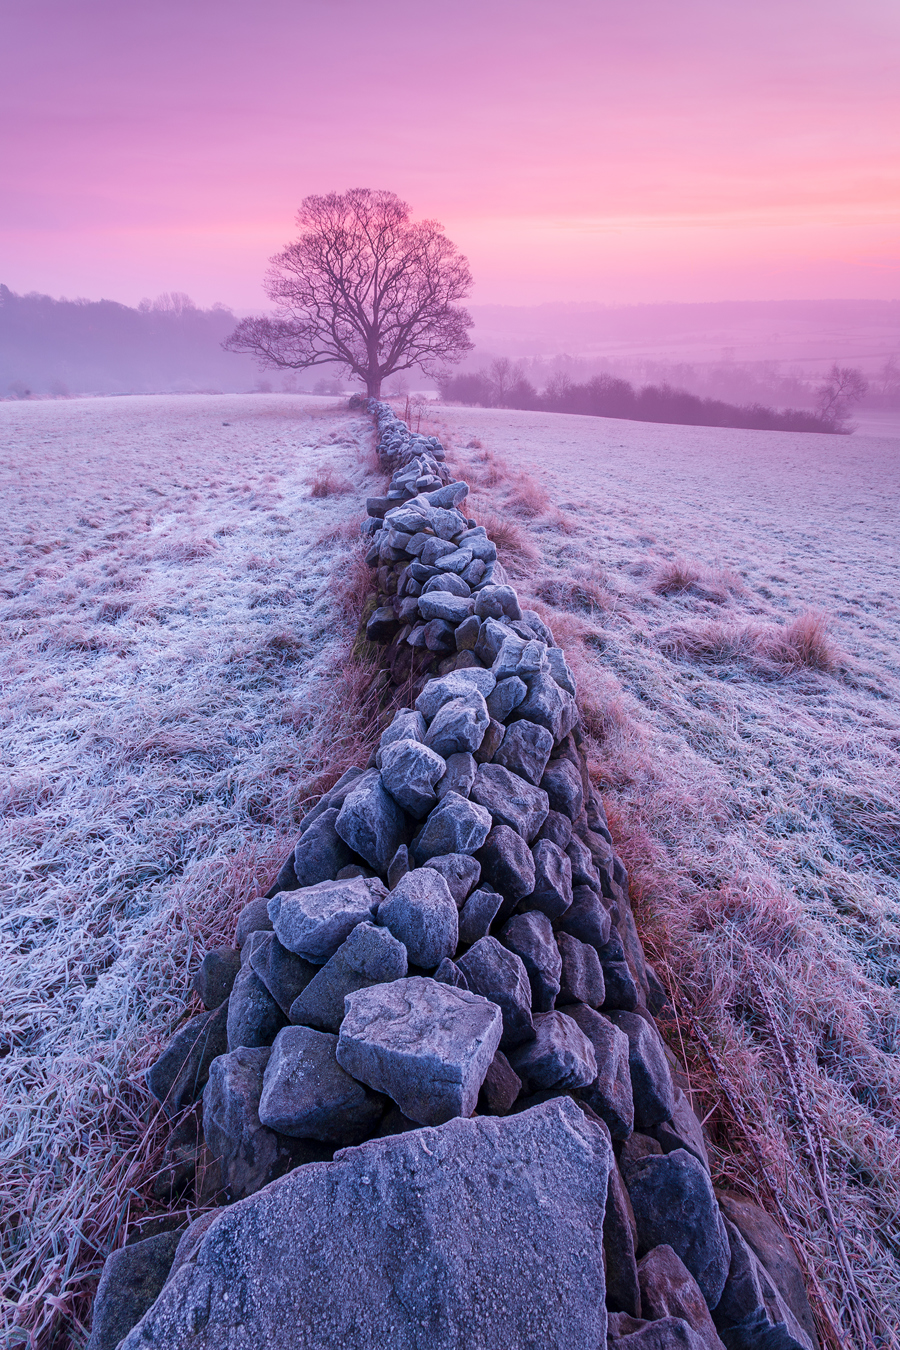 A frost-kissed morning in Crimple Valley, Harrogate, is captured here. A dry stone wall leads to a lone, bare tree against a backdrop of a purple-pink sky, embodying the tranquil beauty of a Yorkshire dawn. a large group of rocks